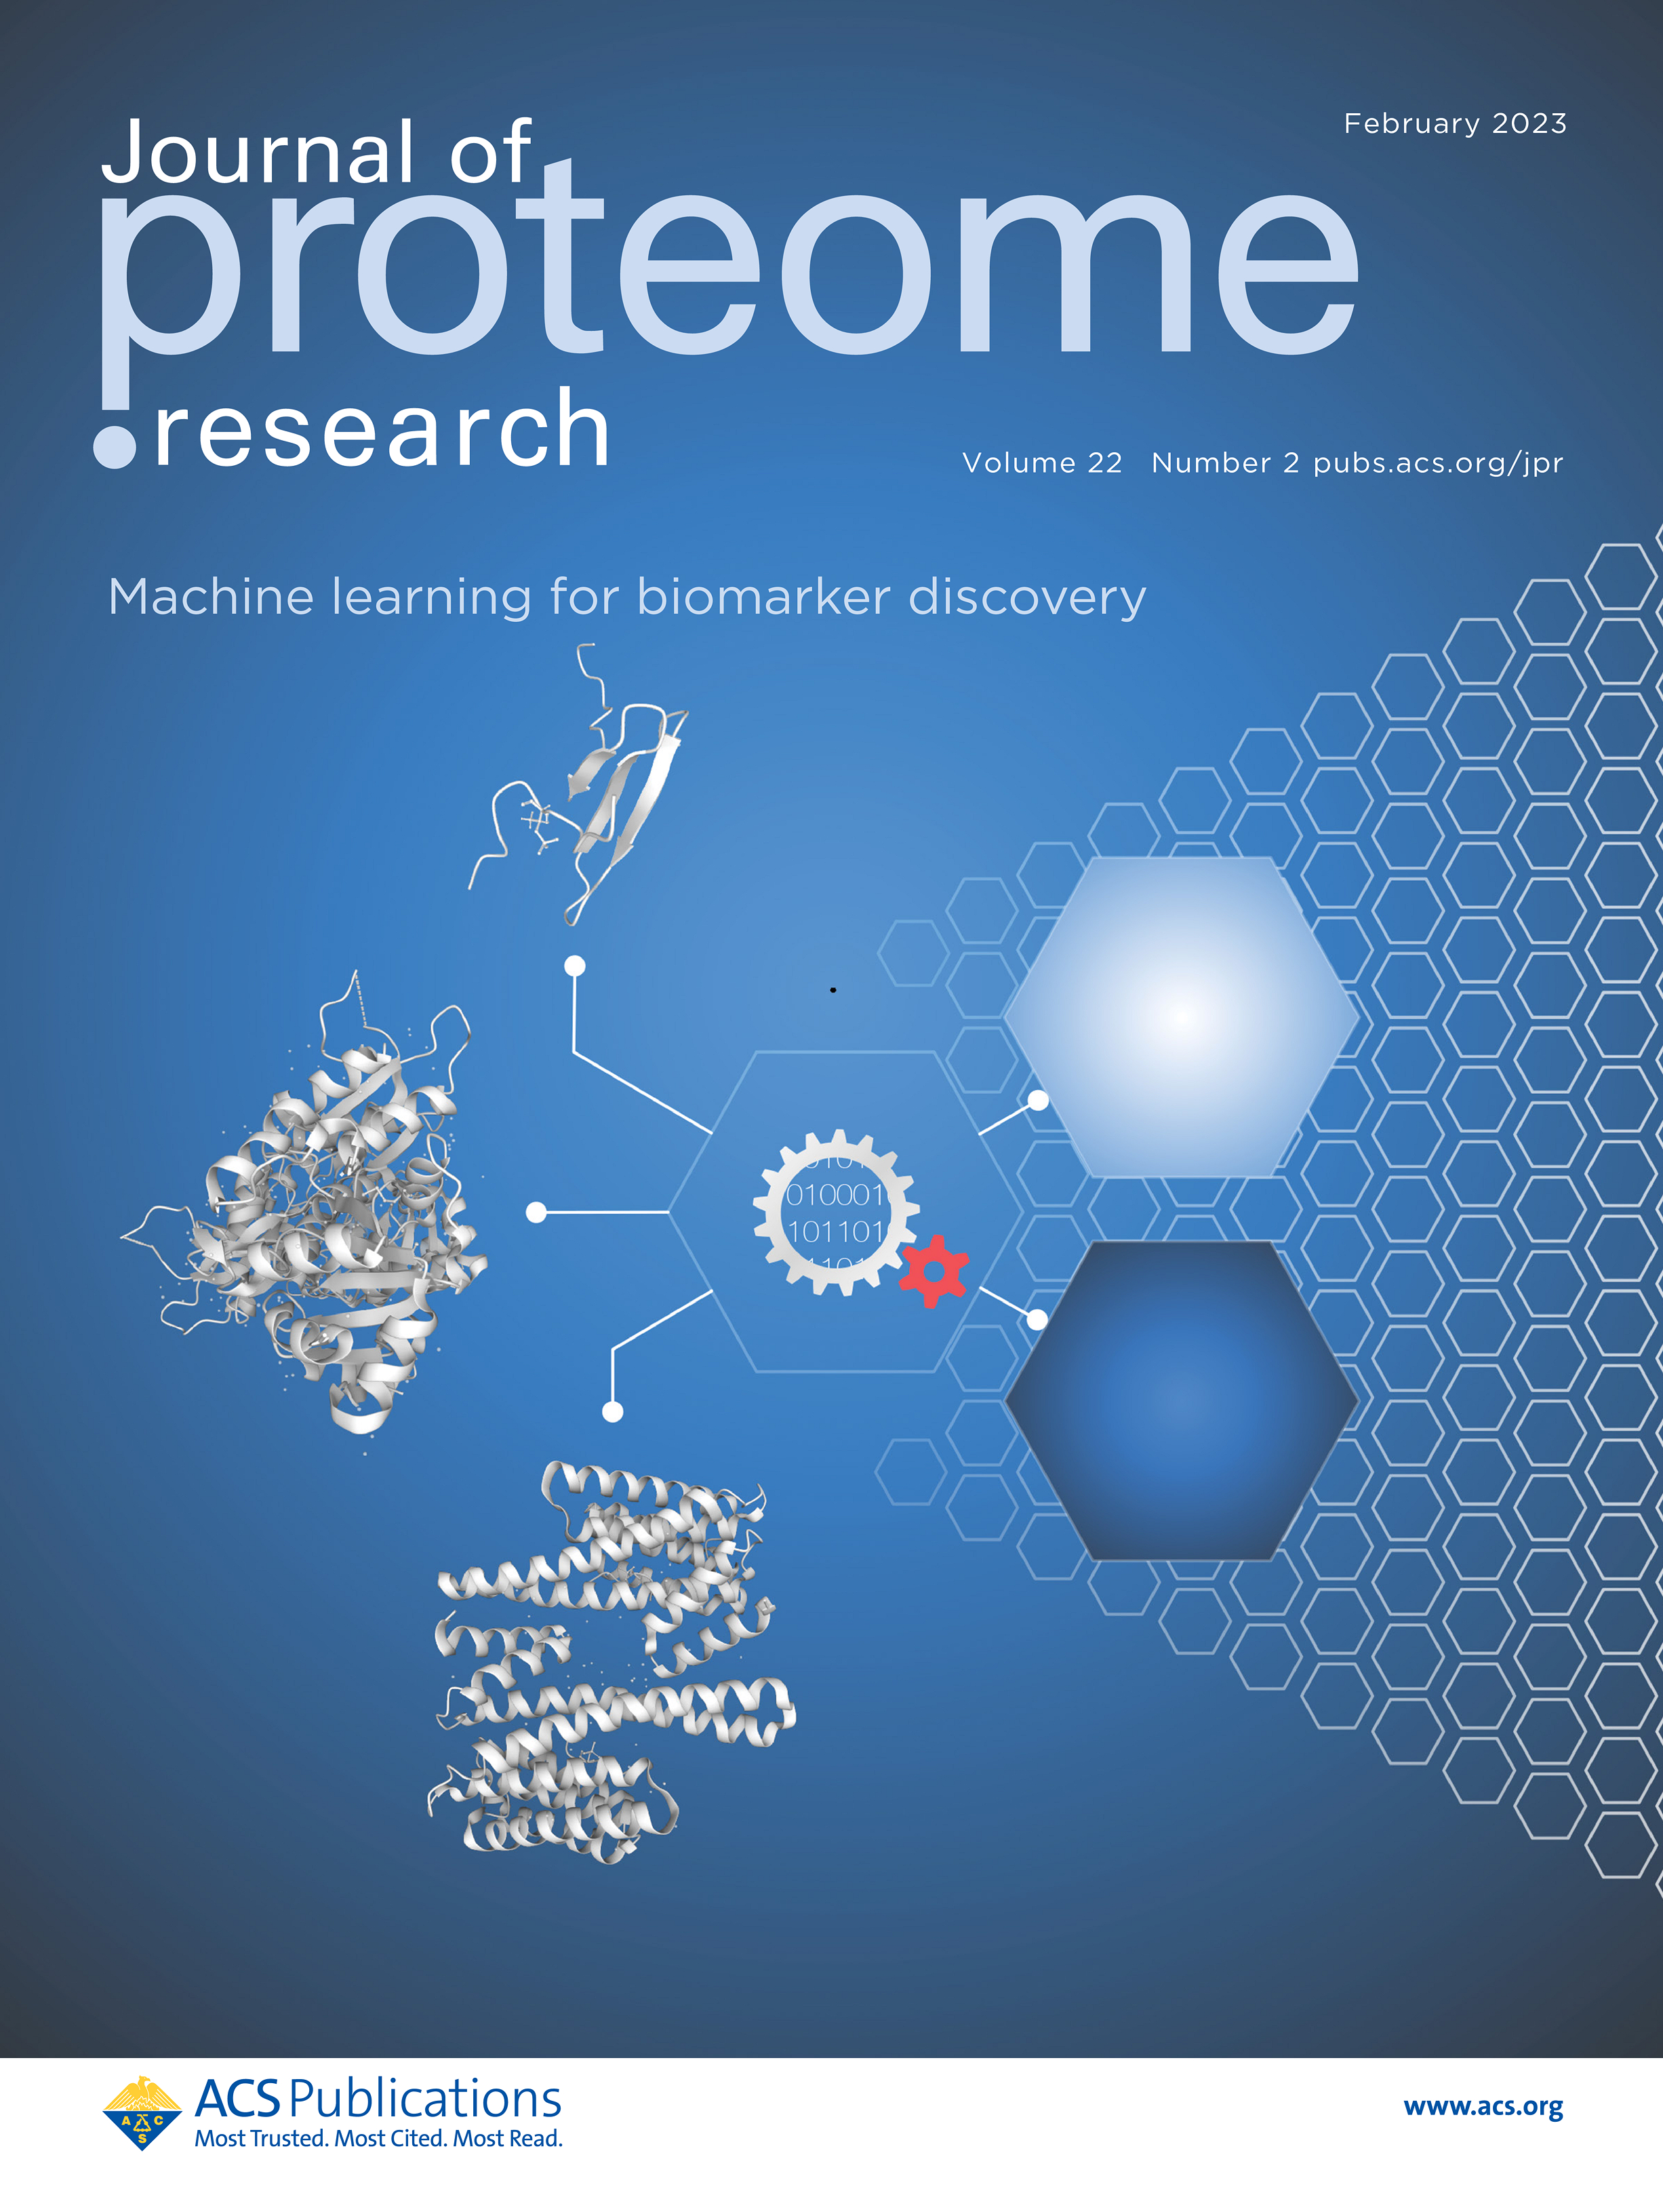 OmicLearn on the Cover of Journal of Proteome Research